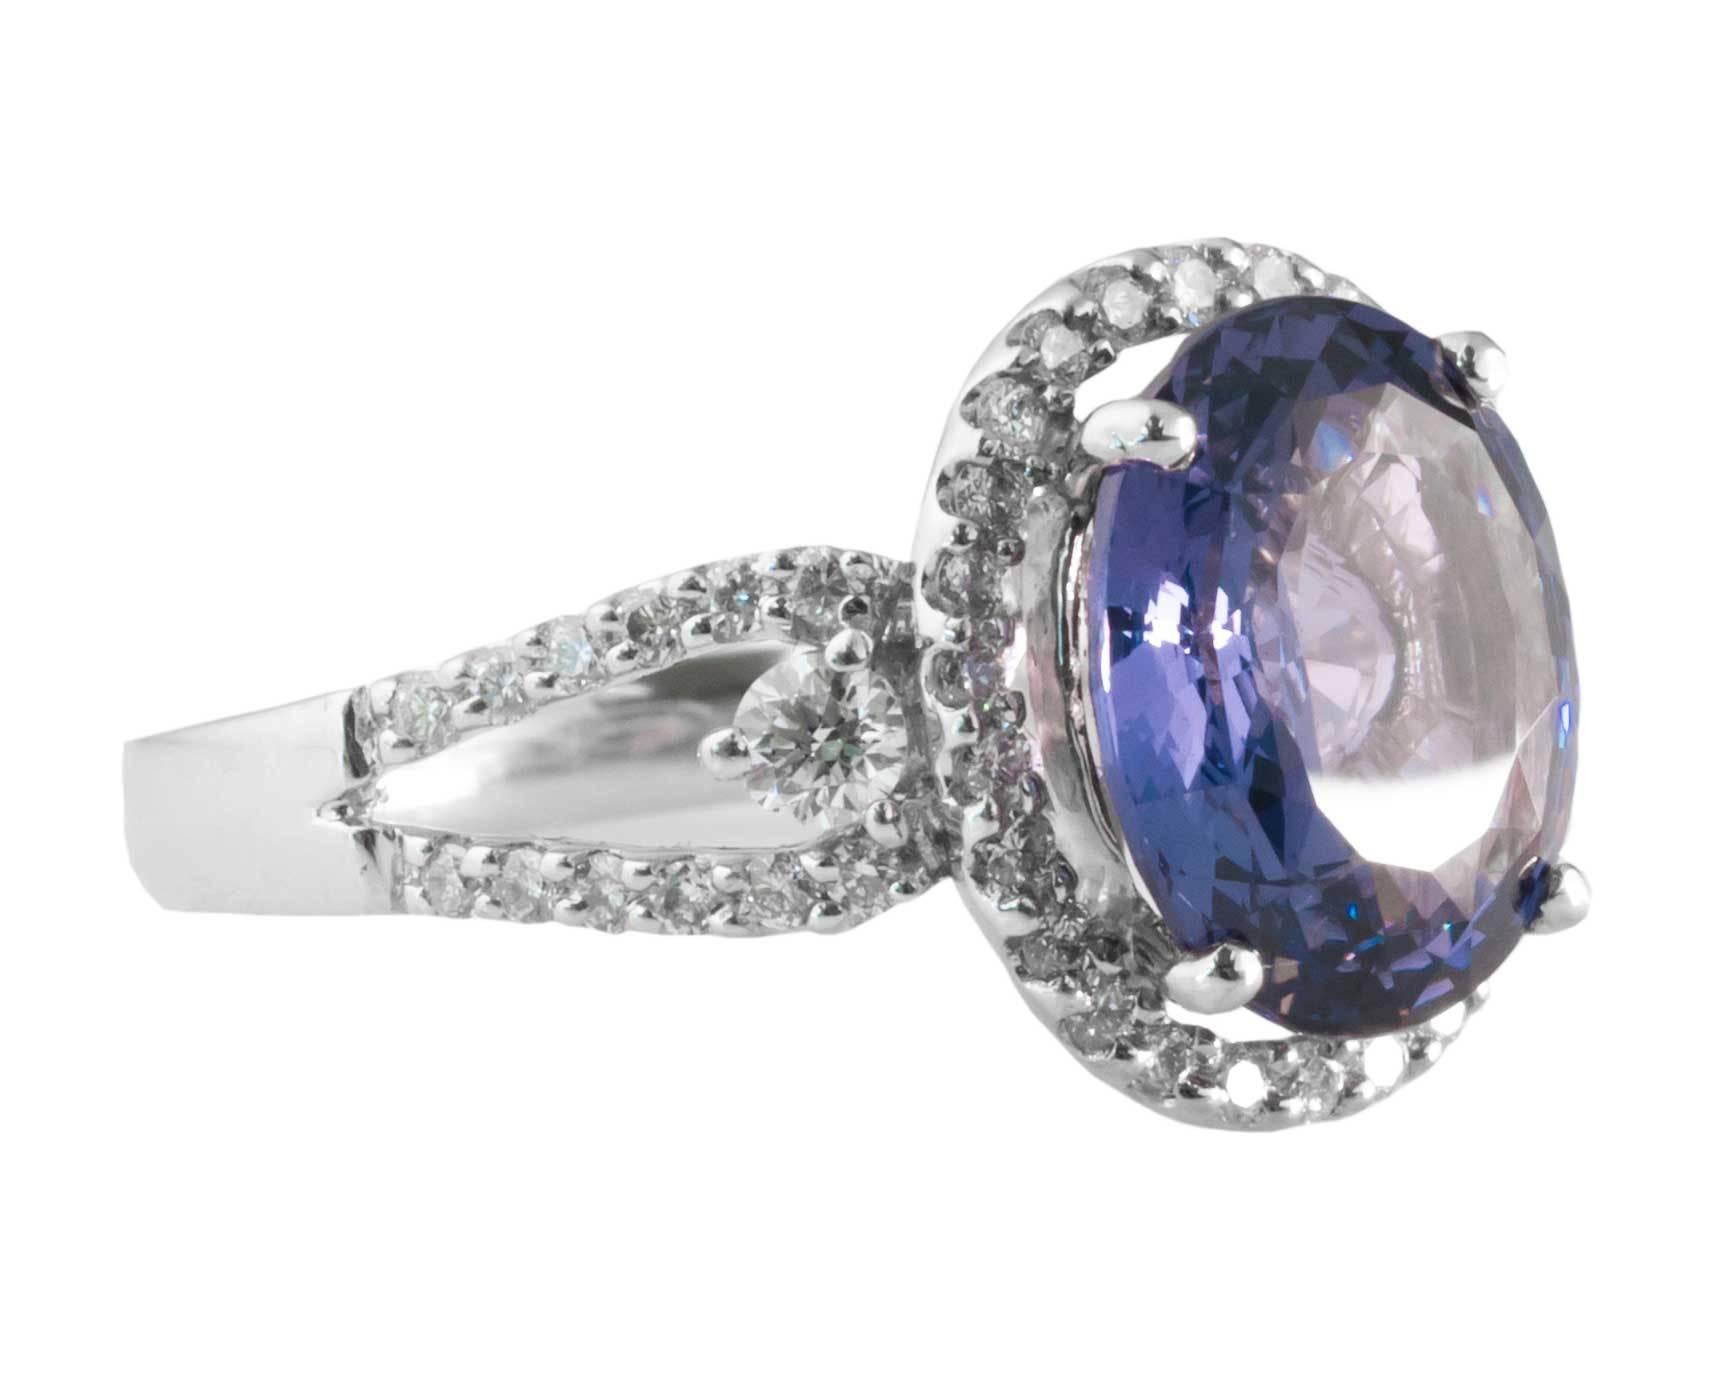 Modern Sapphire and Diamond Cocktail Ring from 1990s

Center features a beautiful 2 Carat Sapphire
Oval Brilliant Cut, Light Blue-Ish Violet Color 
Heat Treatment, Prong-Set

Accent Diamonds make up a Lovely Halo around the Sapphire as well as